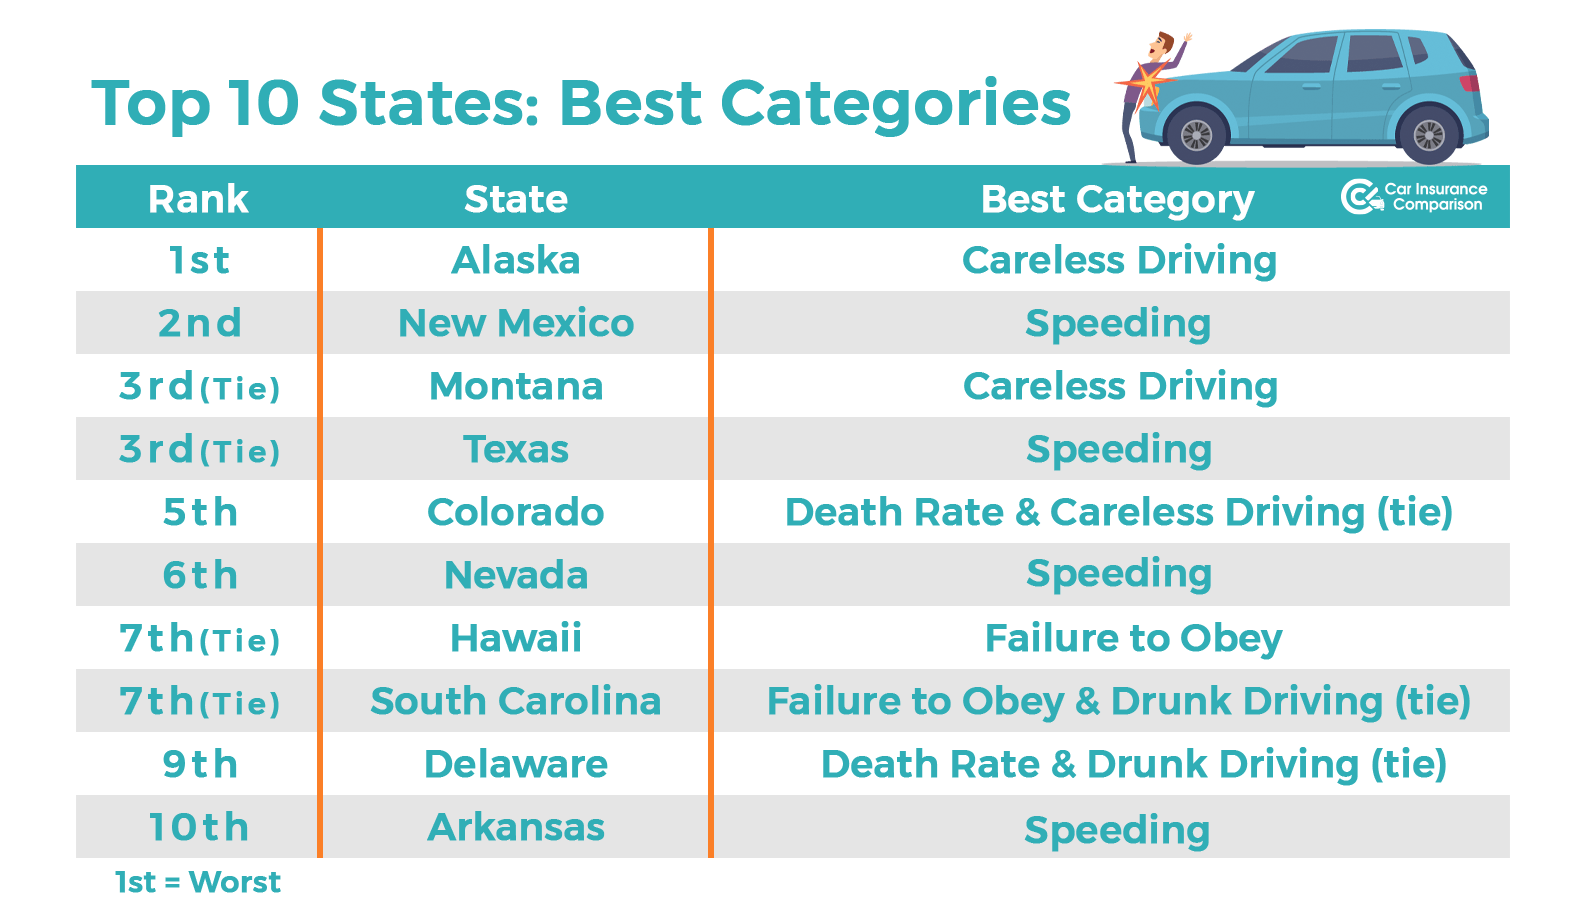 10 states with the worst drivers - best categories